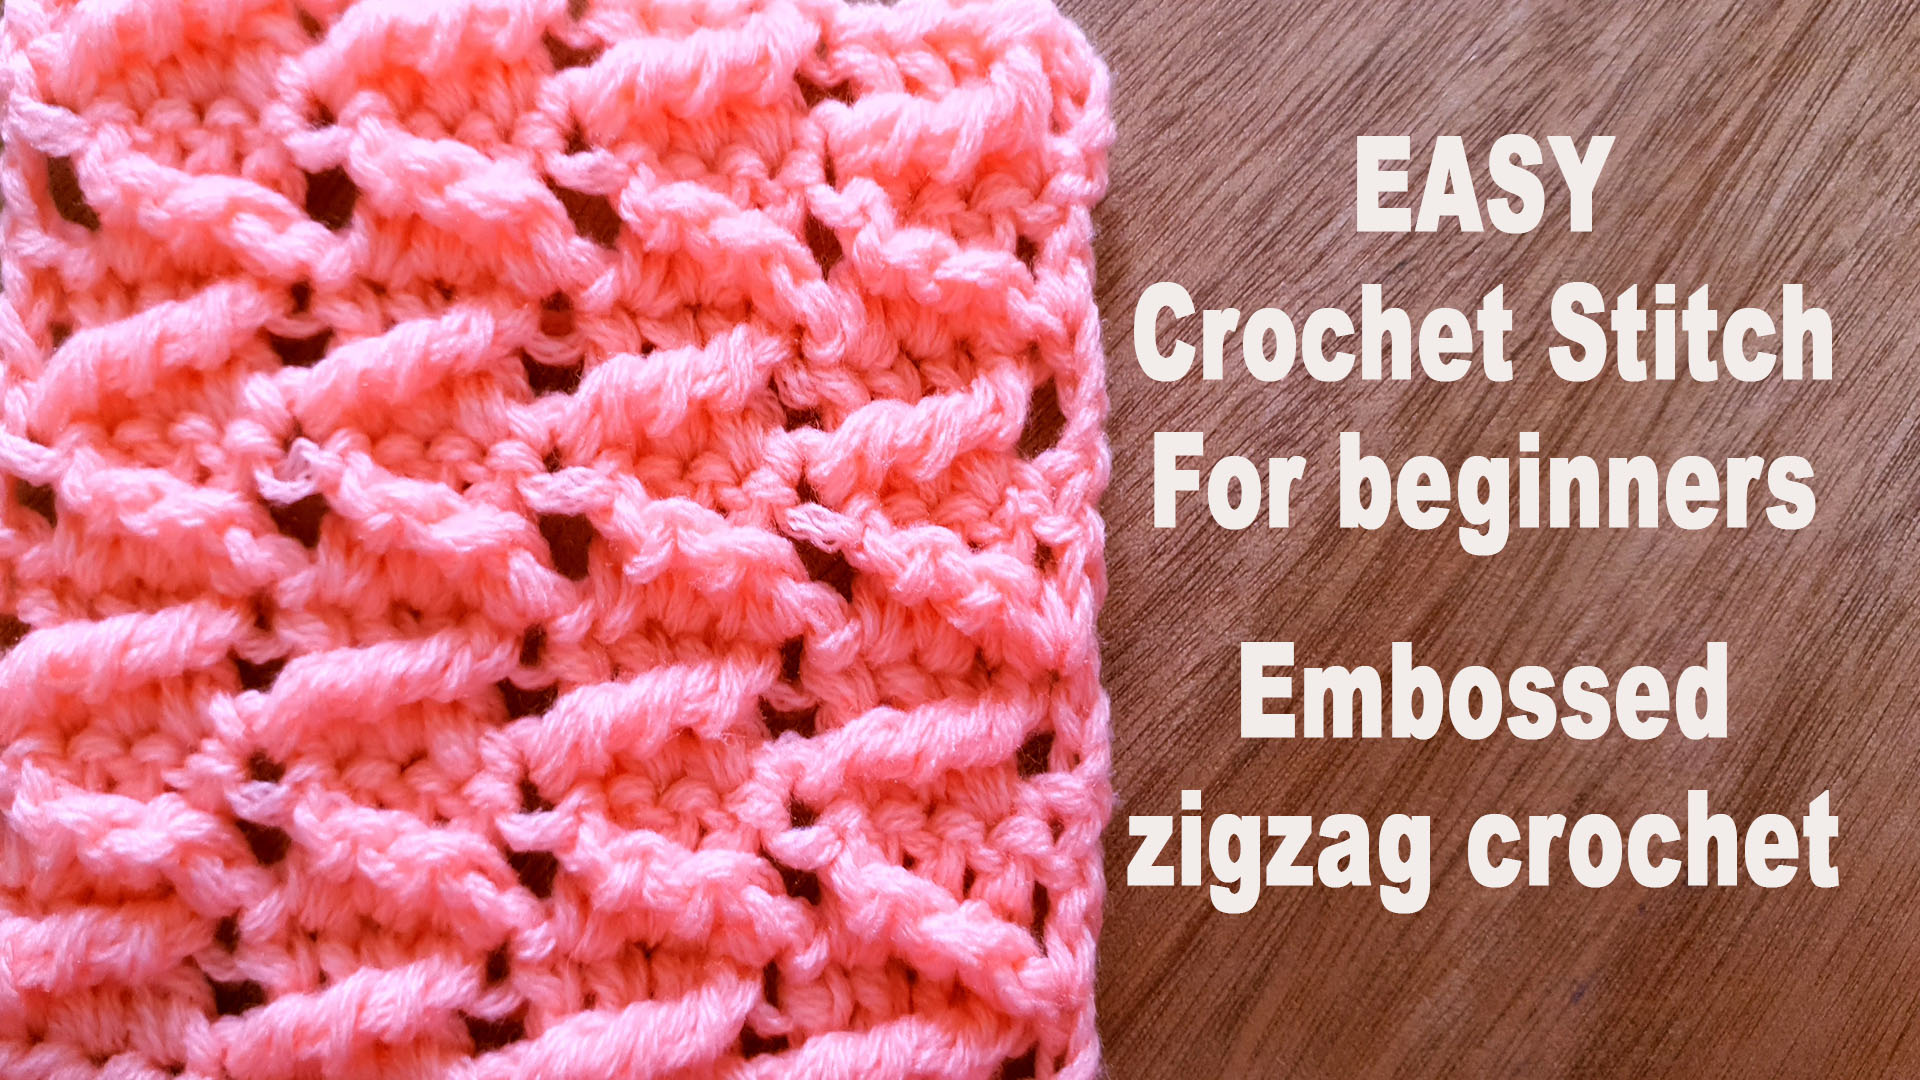 EASY Crochet Stitch For beginners – Embossed zigzag crochet stitch